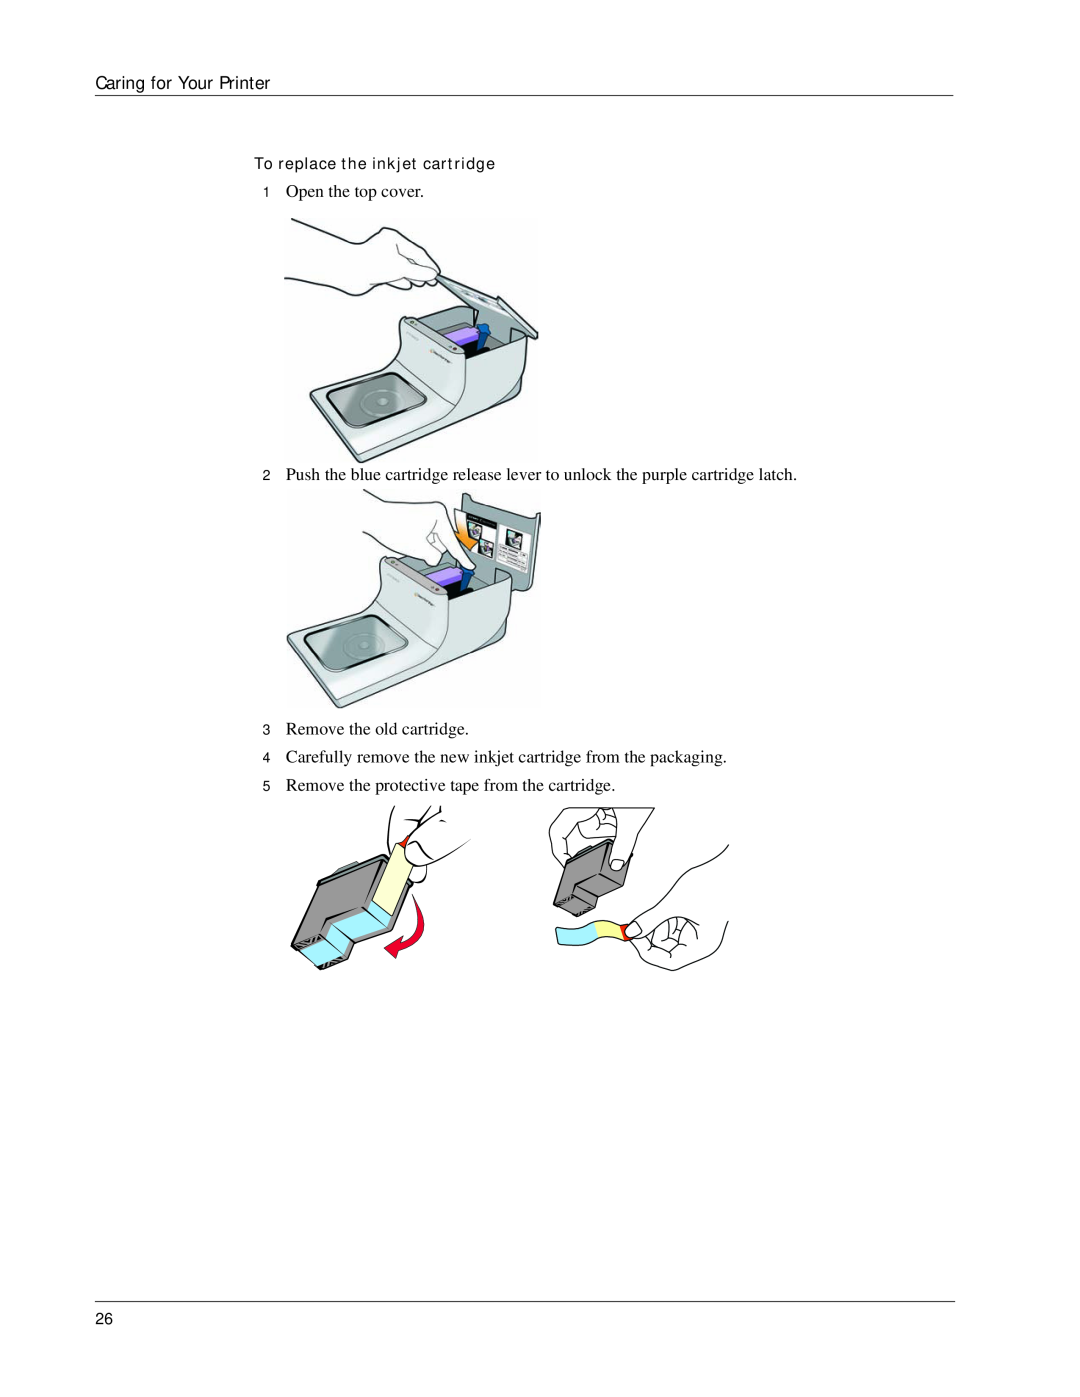 Dymo DiscPainter Caring for Your Printer, Open the top cover, Remove the old cartridge, To replace the inkjet cartridge 